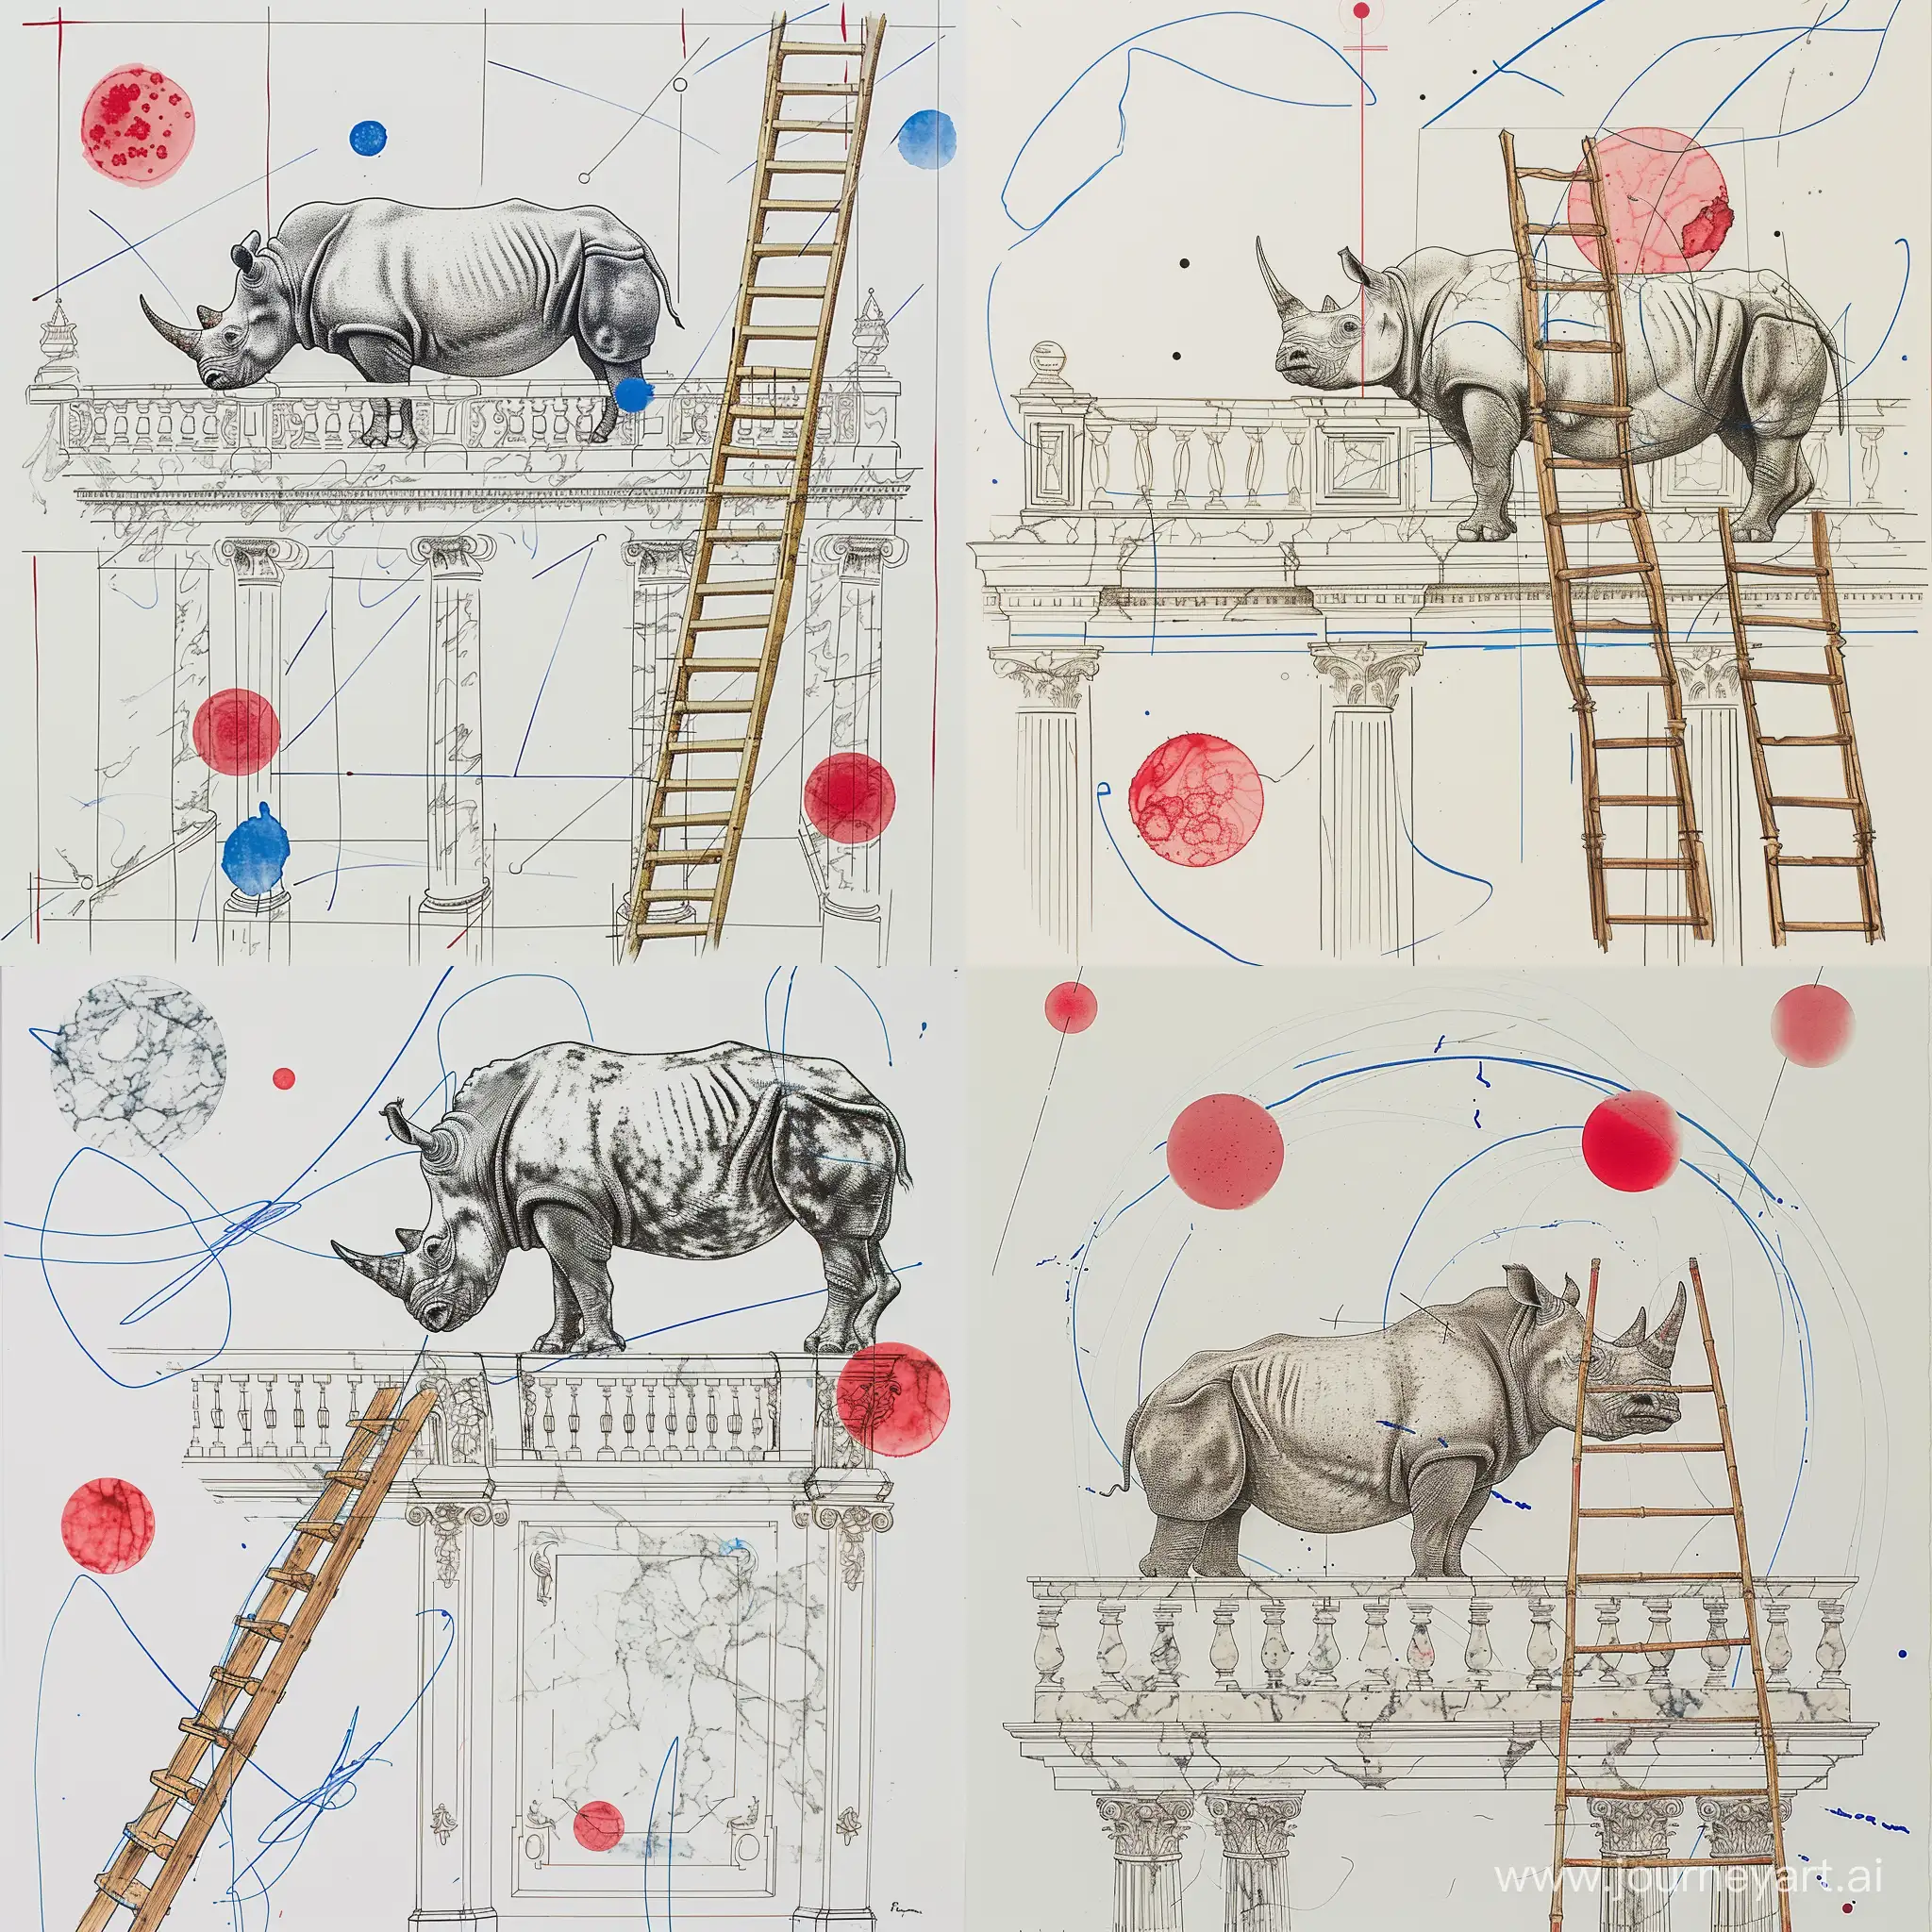 Majestic-Rhinoceros-on-Wooden-Ladder-with-Rococo-Balustrade-Abstract-Alcohol-Ink-Art